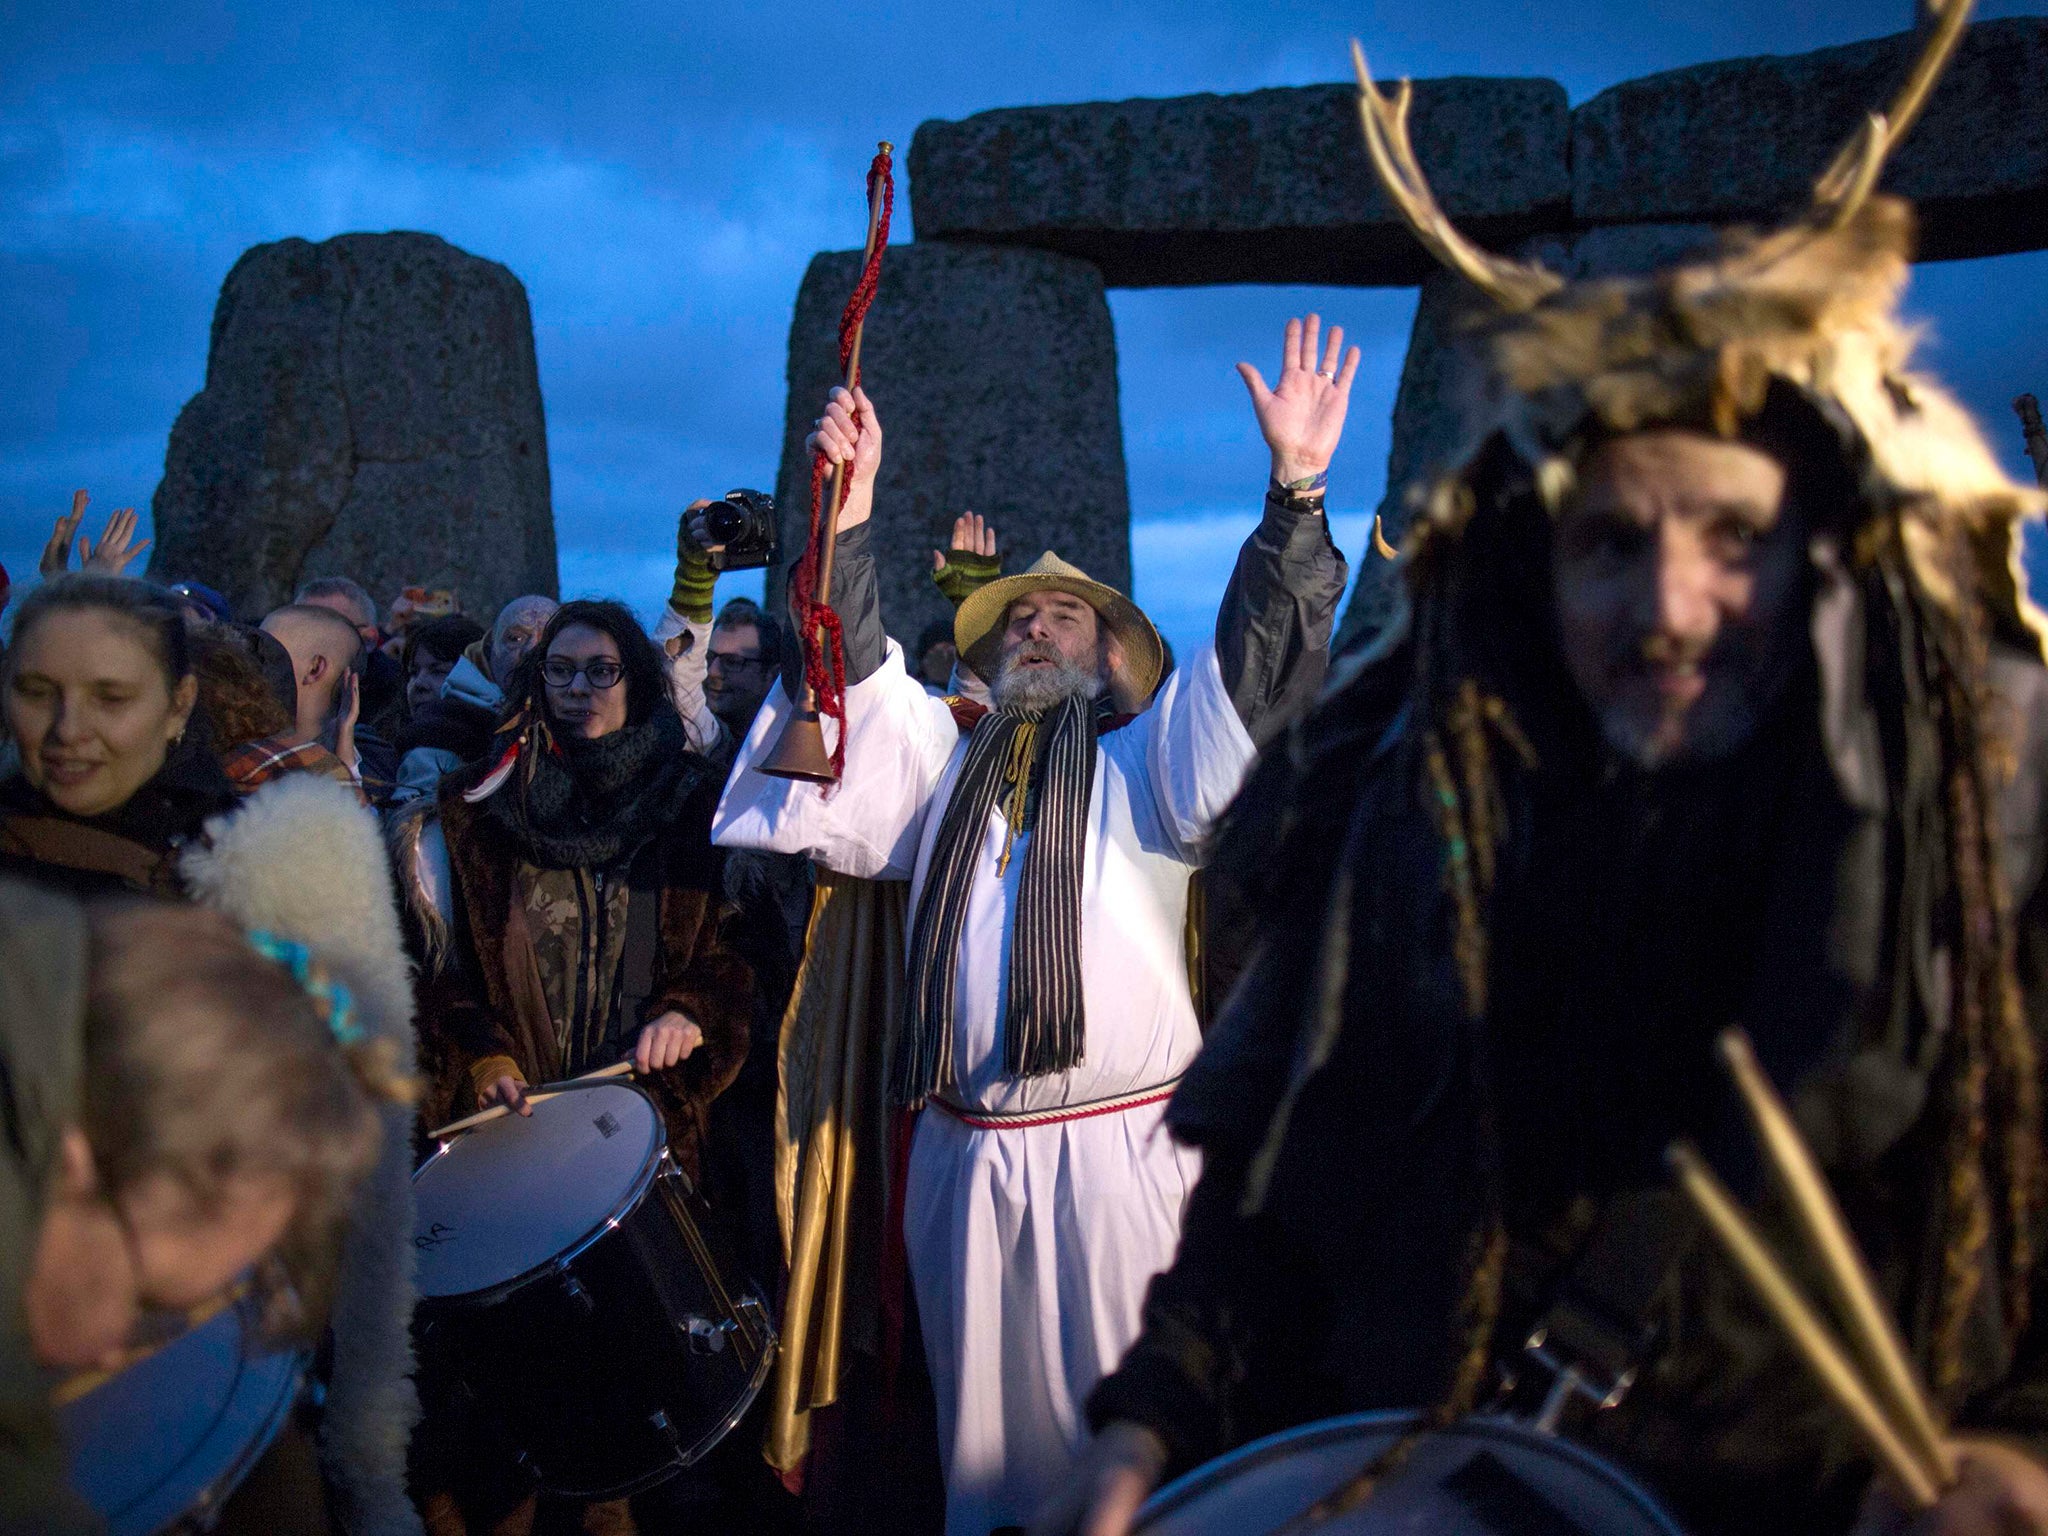 Revellers celebrate the winter solstice at Stonehenge on Salisbury Plain in southern England